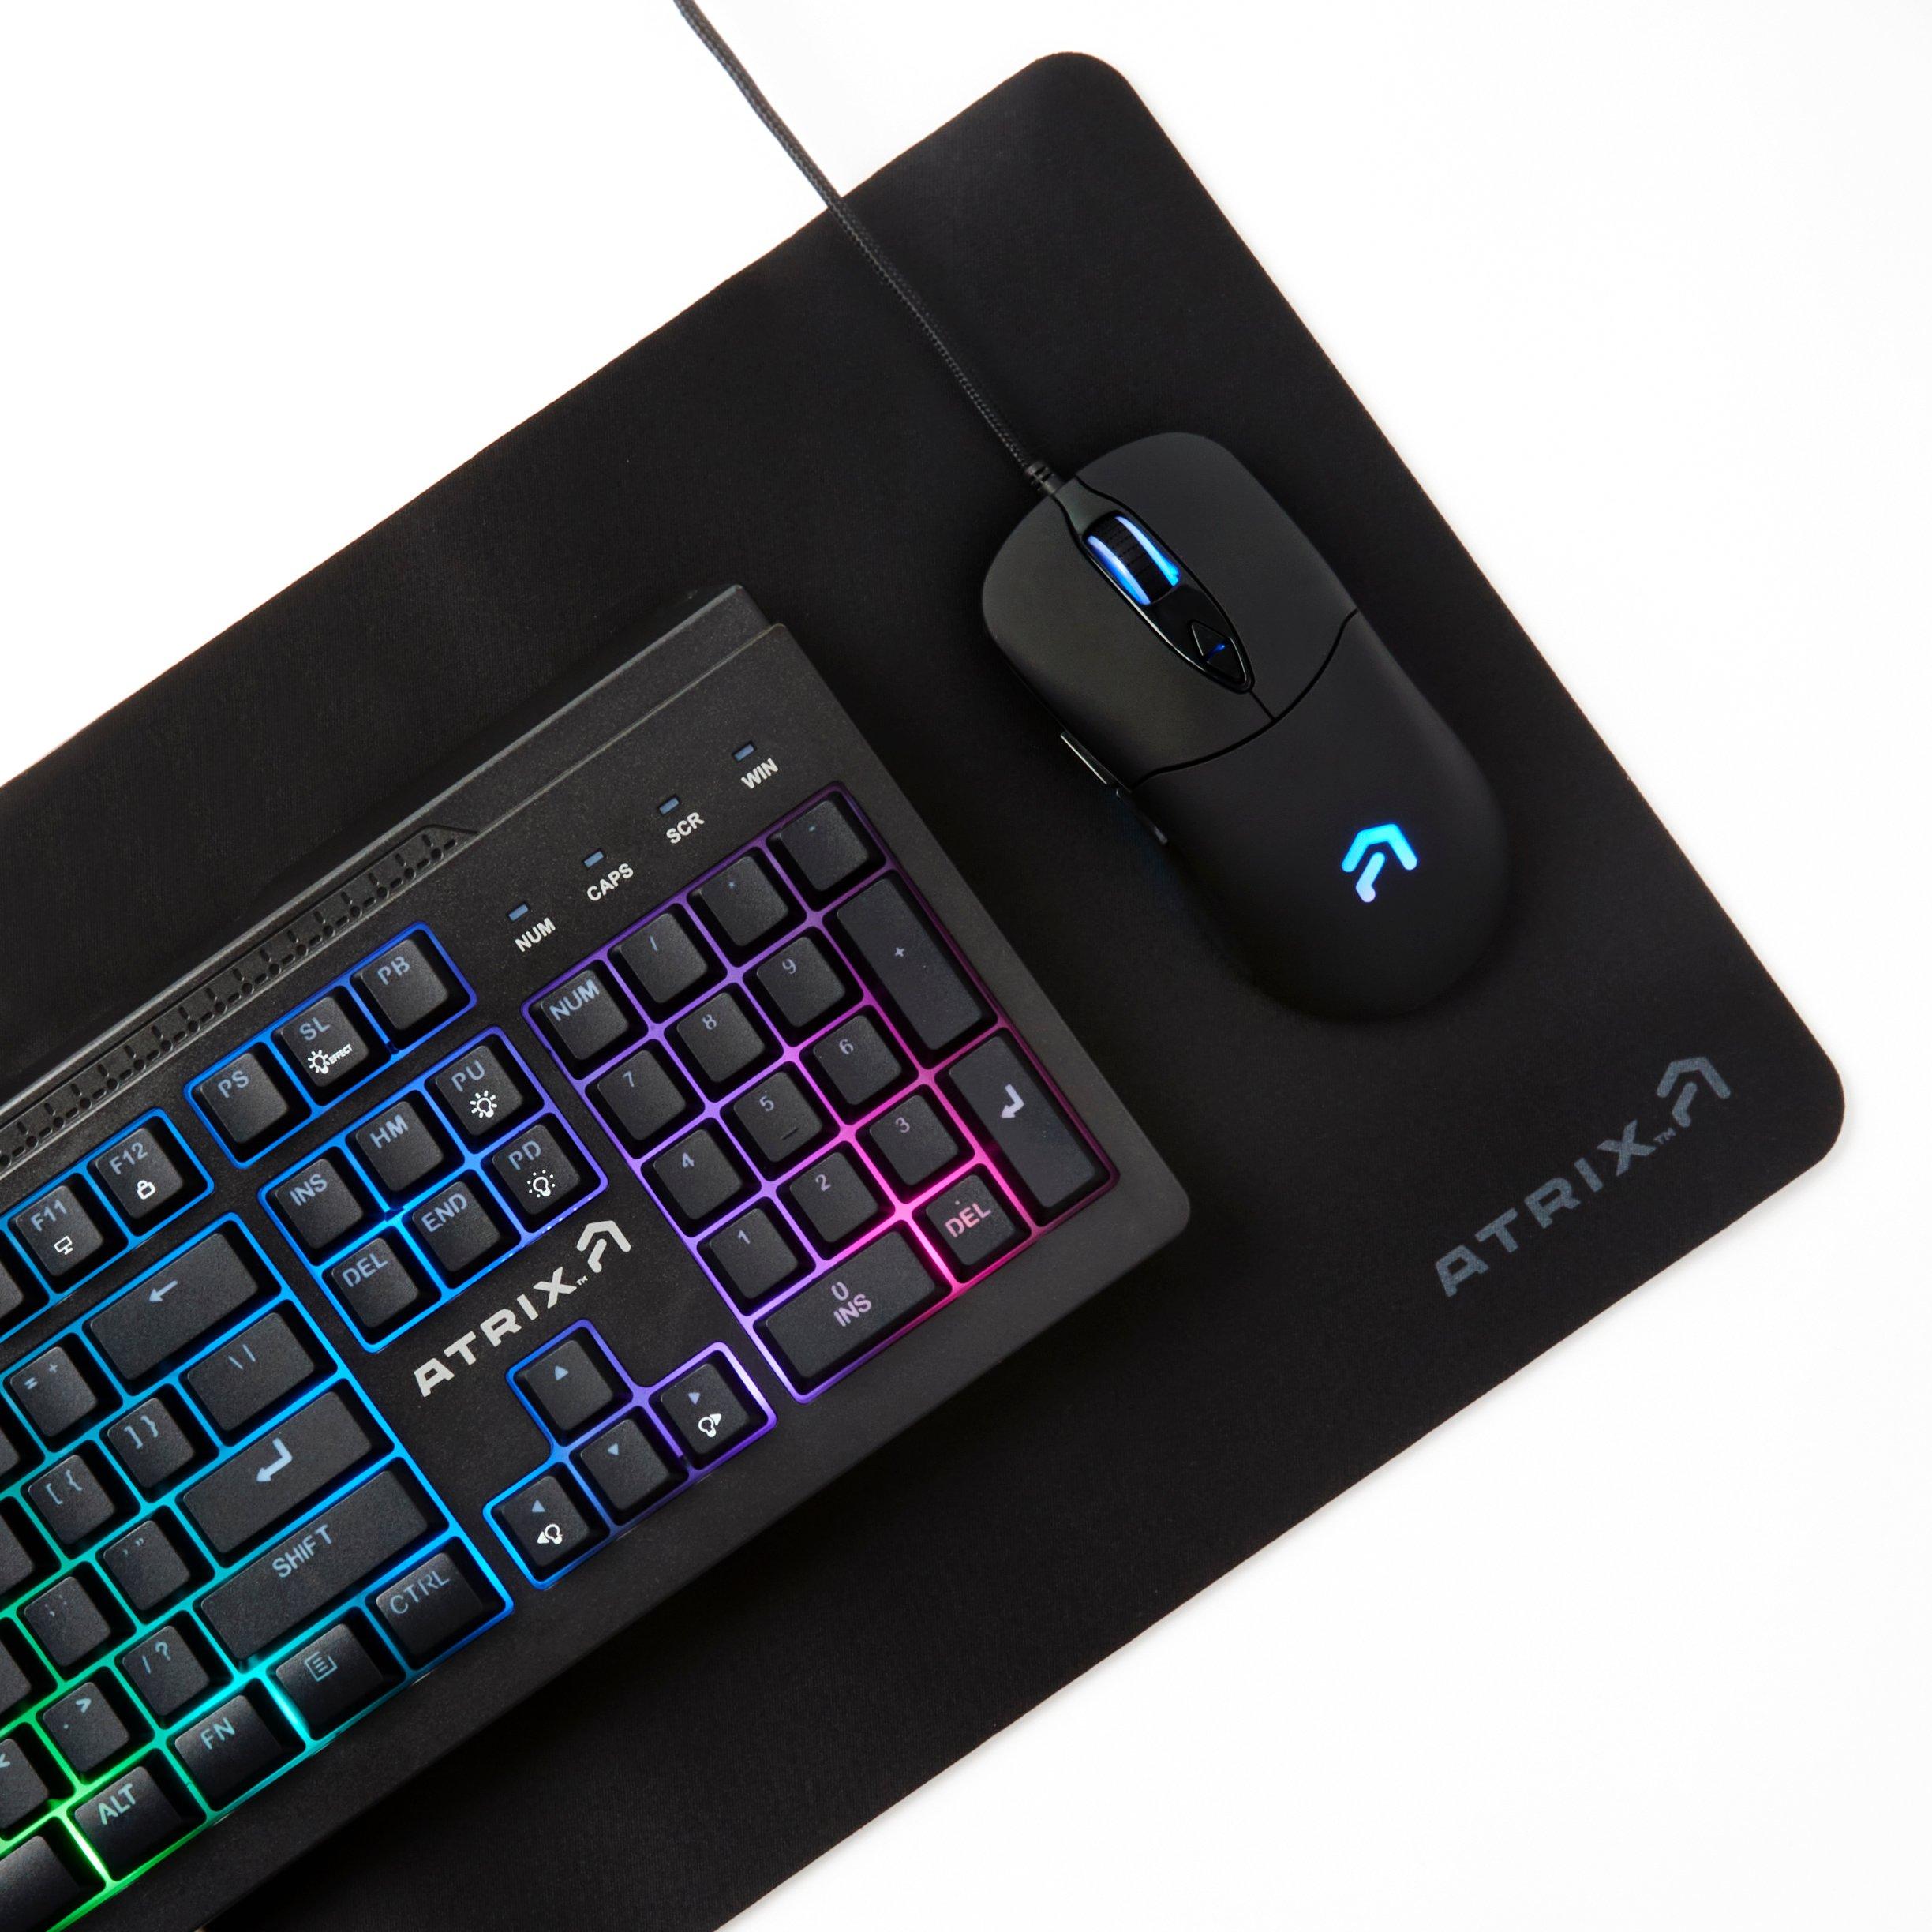 Atrix PC Gaming Bundle with Full Wired Gaming Keyboard with RGB, 7-Button Wired Gaming Mouse, and Mouse Pad